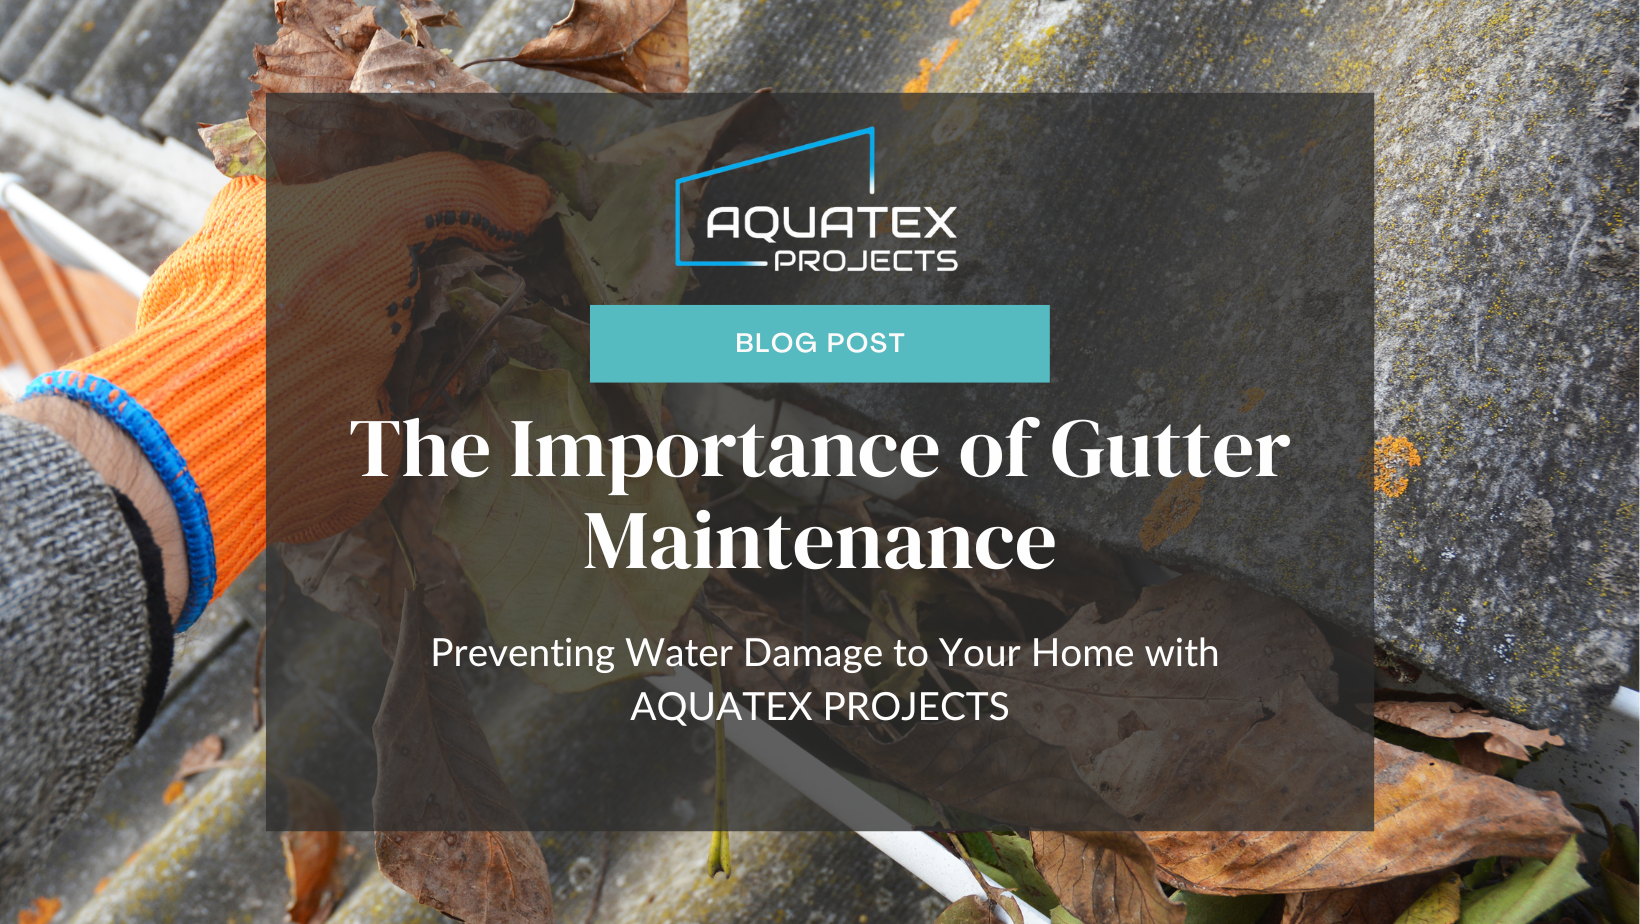 The Importance of Gutter Maintenance: Preventing Water Damage to Your Home with AQUATEX PROJECTS